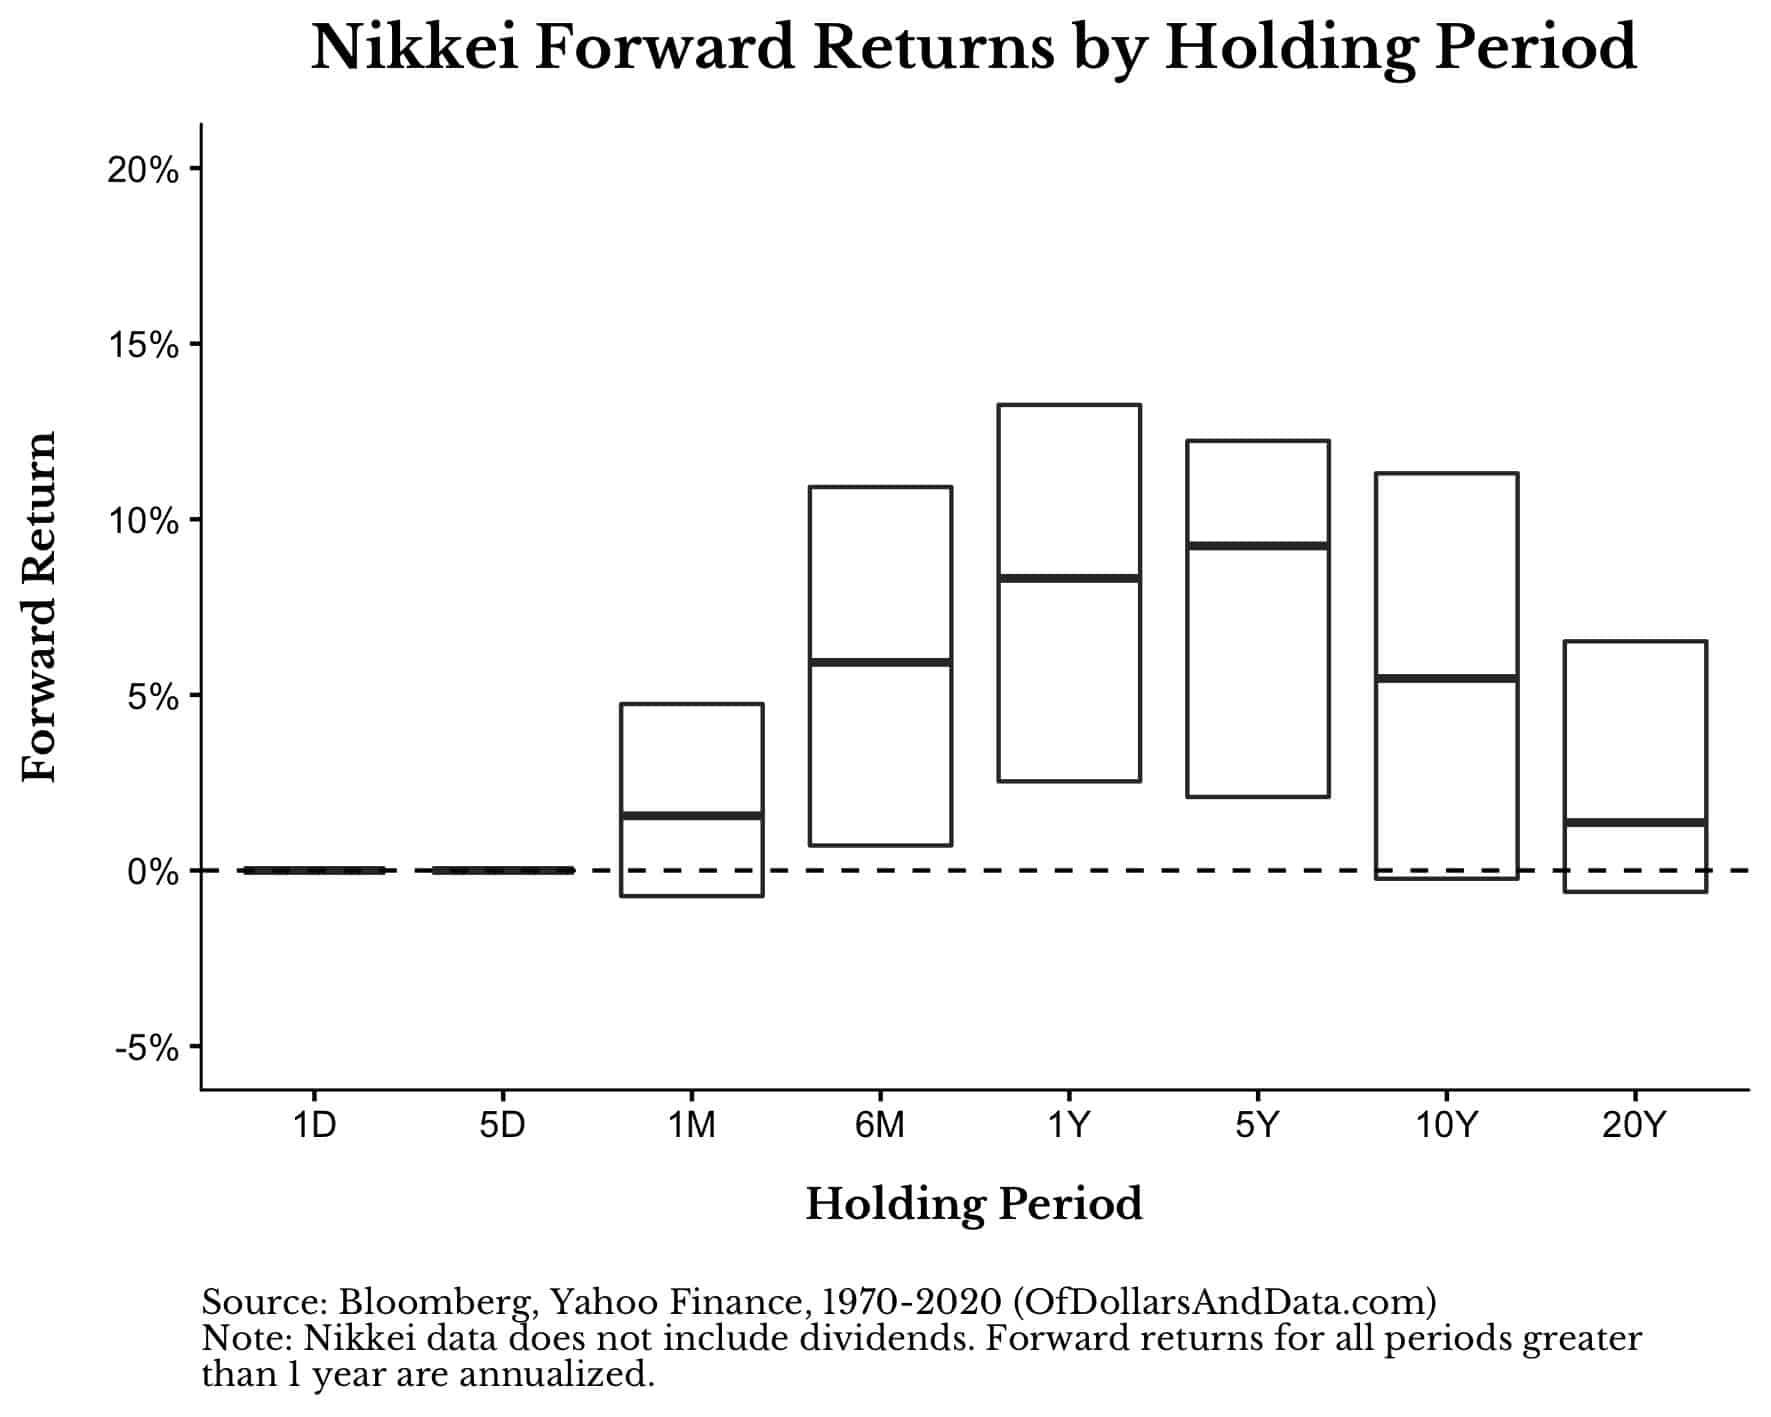 Nikkei forward returns by holding period